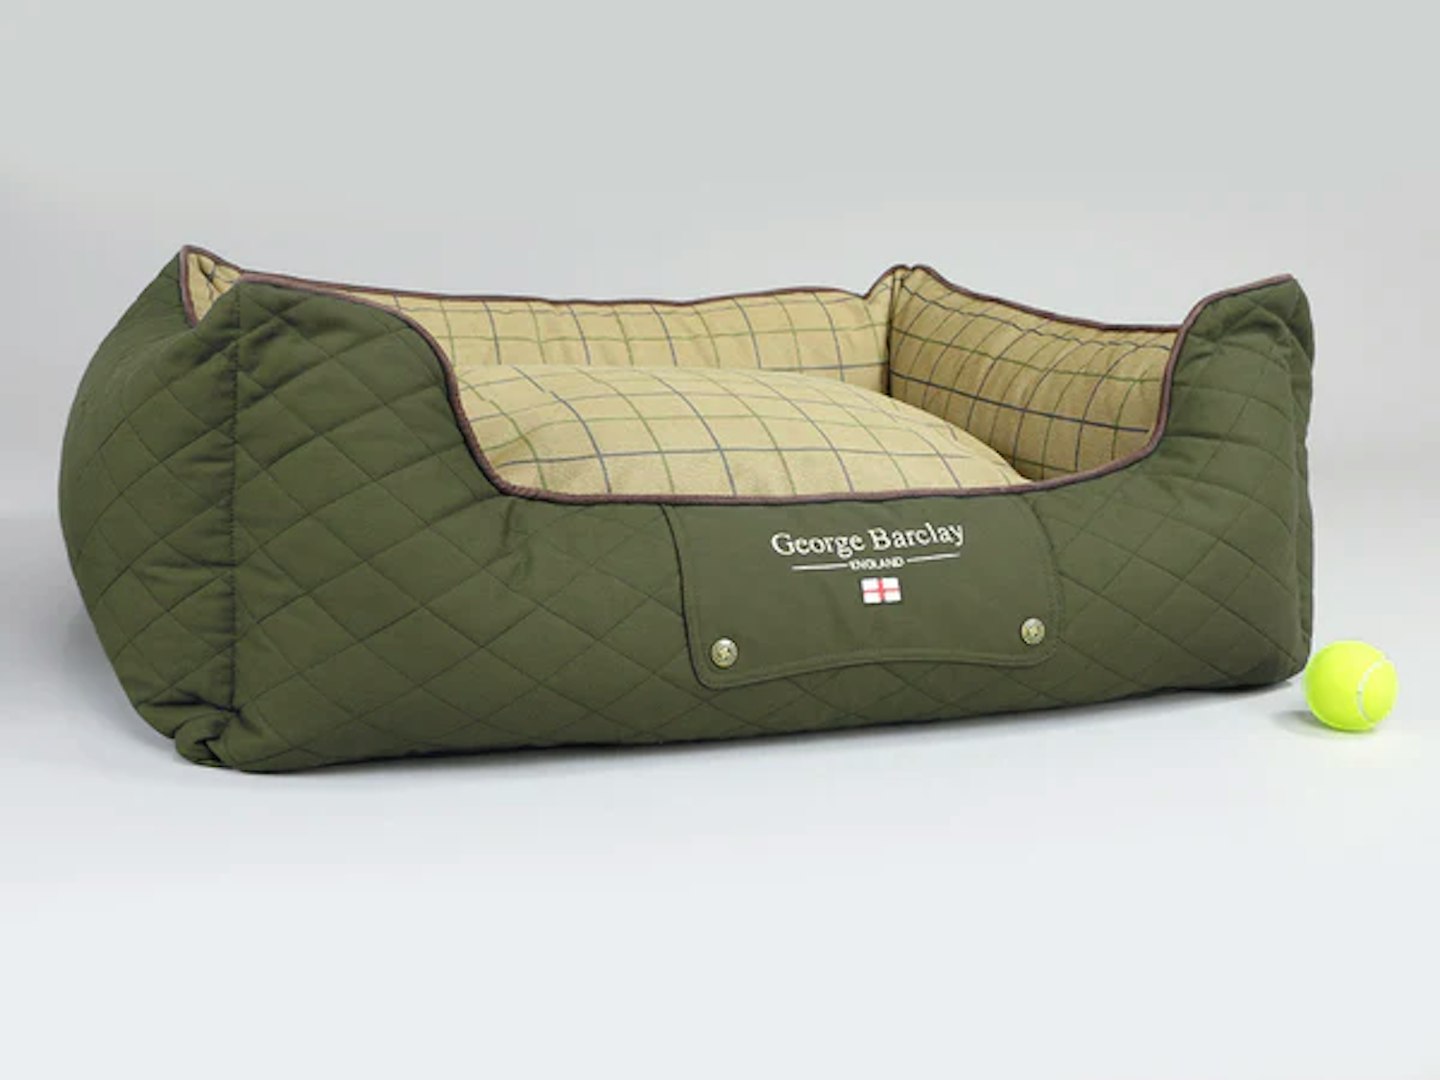 best orthopaedic dog bed overall